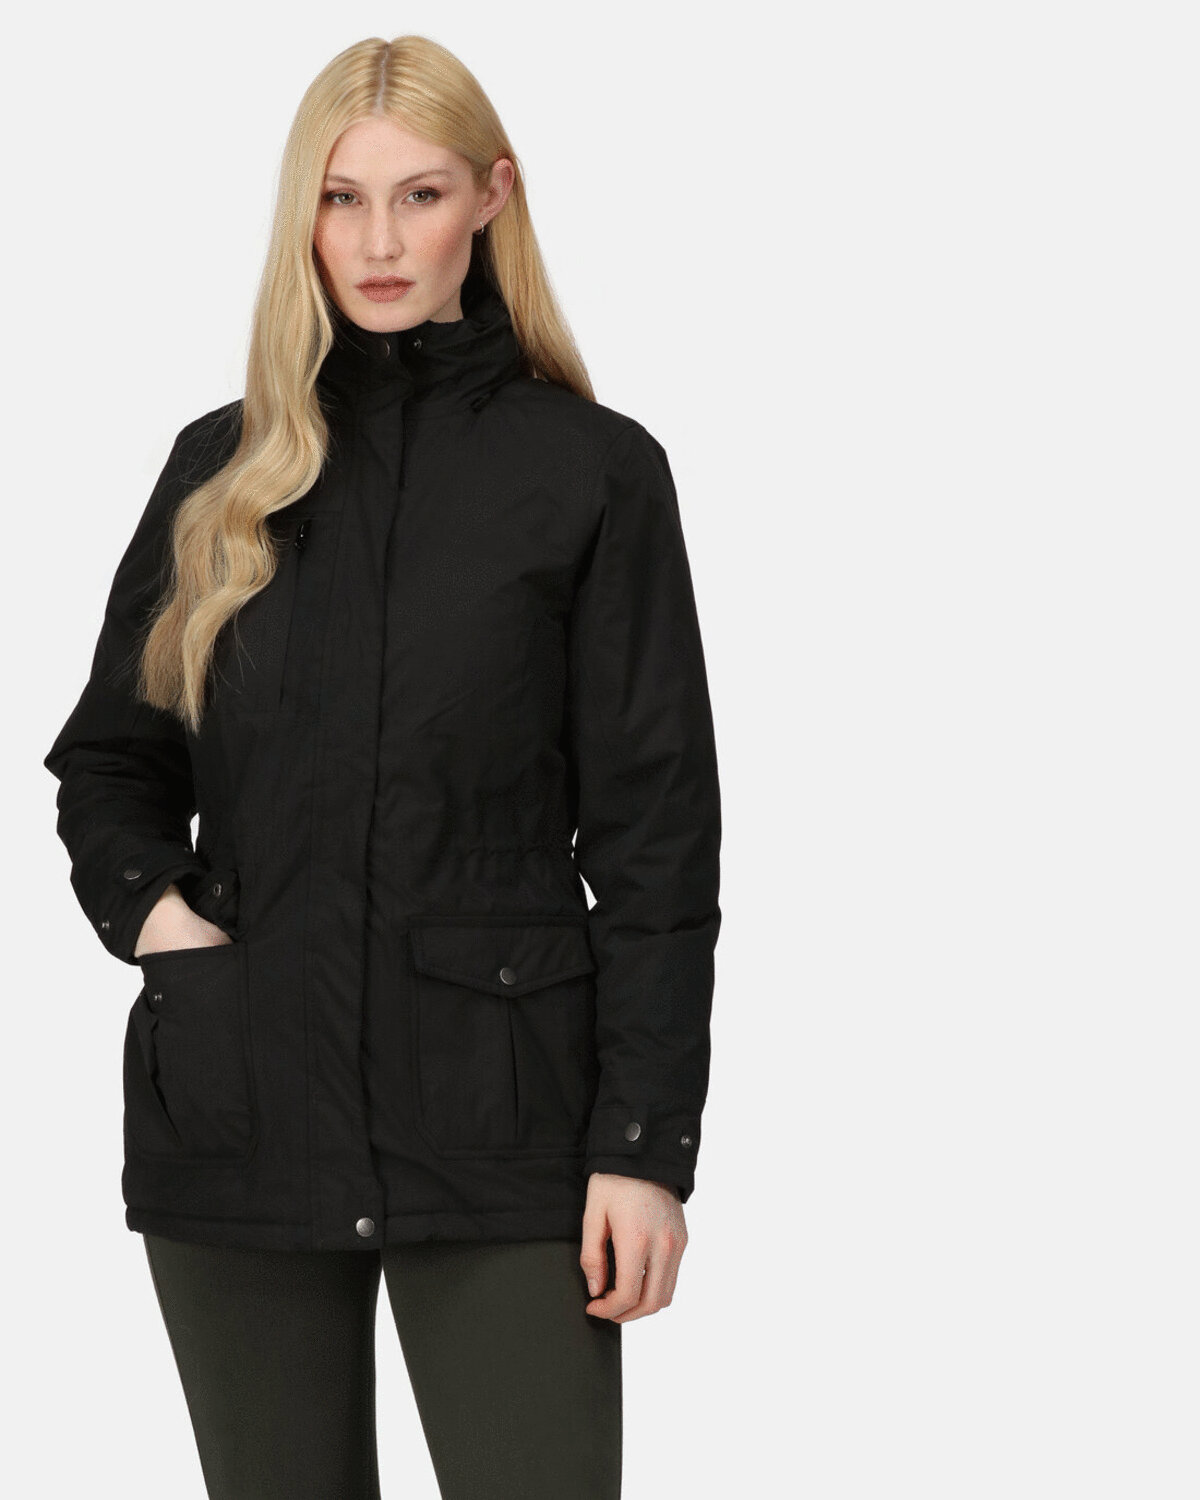 RG079M-LADIES DARBY III INSULATED PARKA JACKET